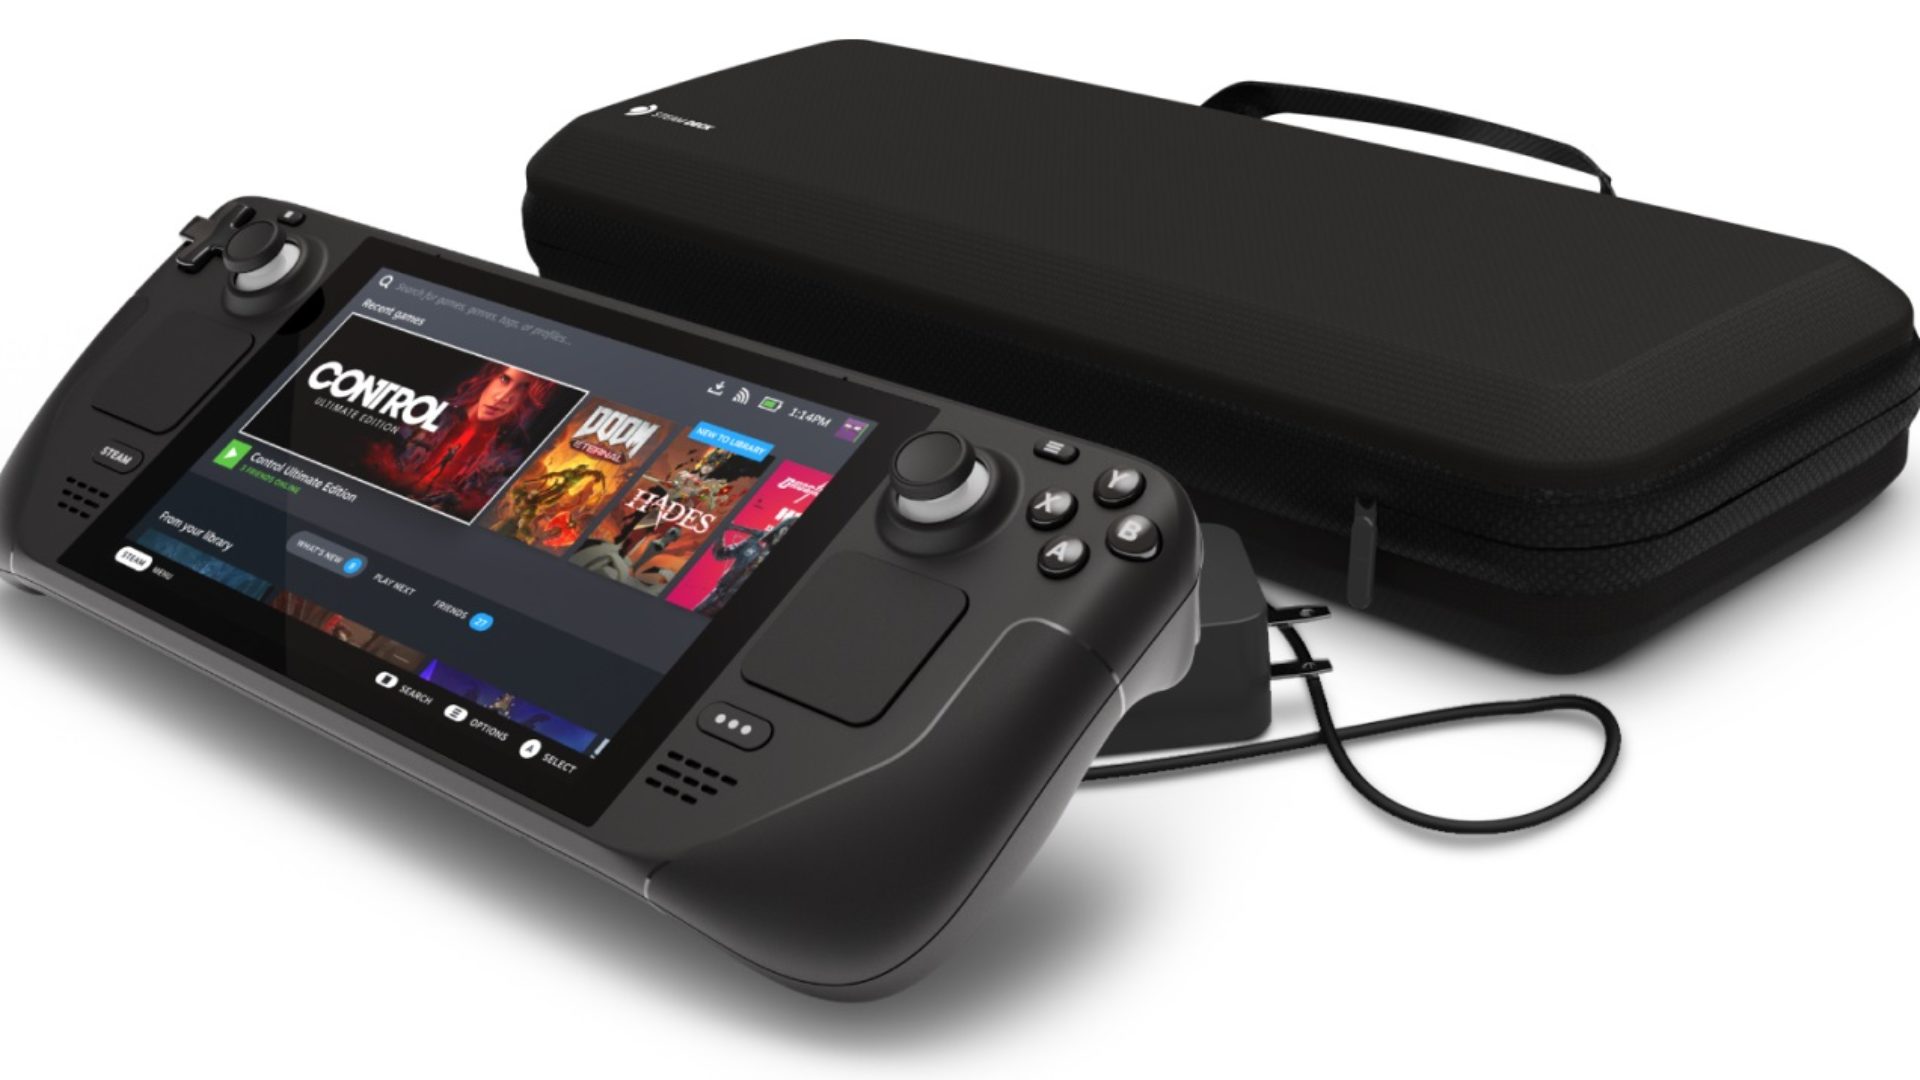 Steam Deck: Valve's Switch-style portable console

